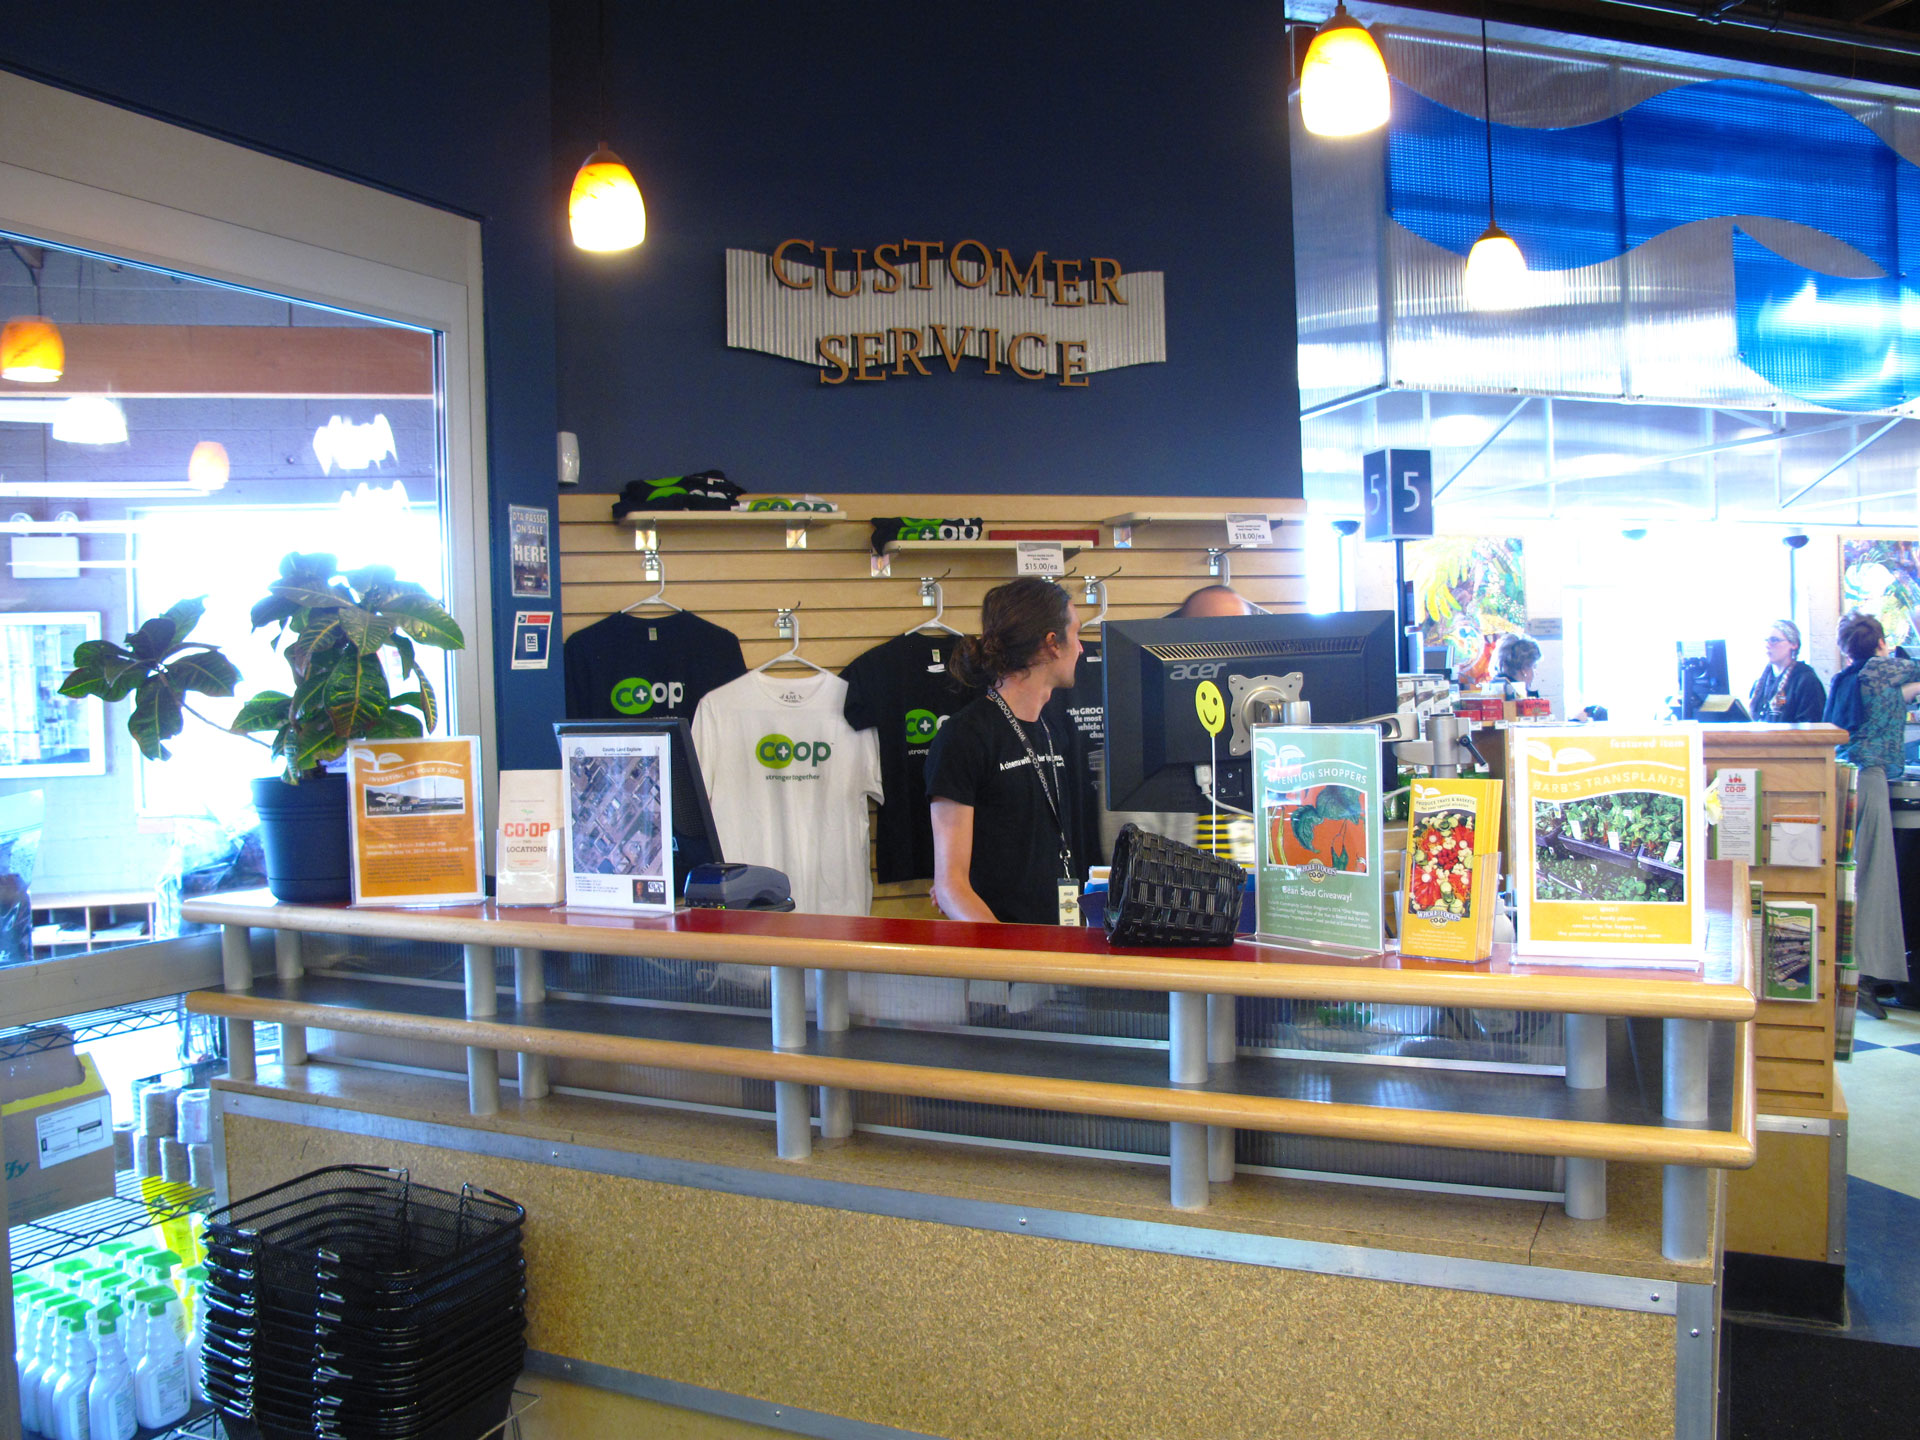 A customer service desk at Whole Foods Coop in Duluth, MN features various brochures and flyers displayed. Behind the counter, a uniformed person stands near a computer. Co-op branded t-shirts are hung on the wall, and potted plants decorate the counter.